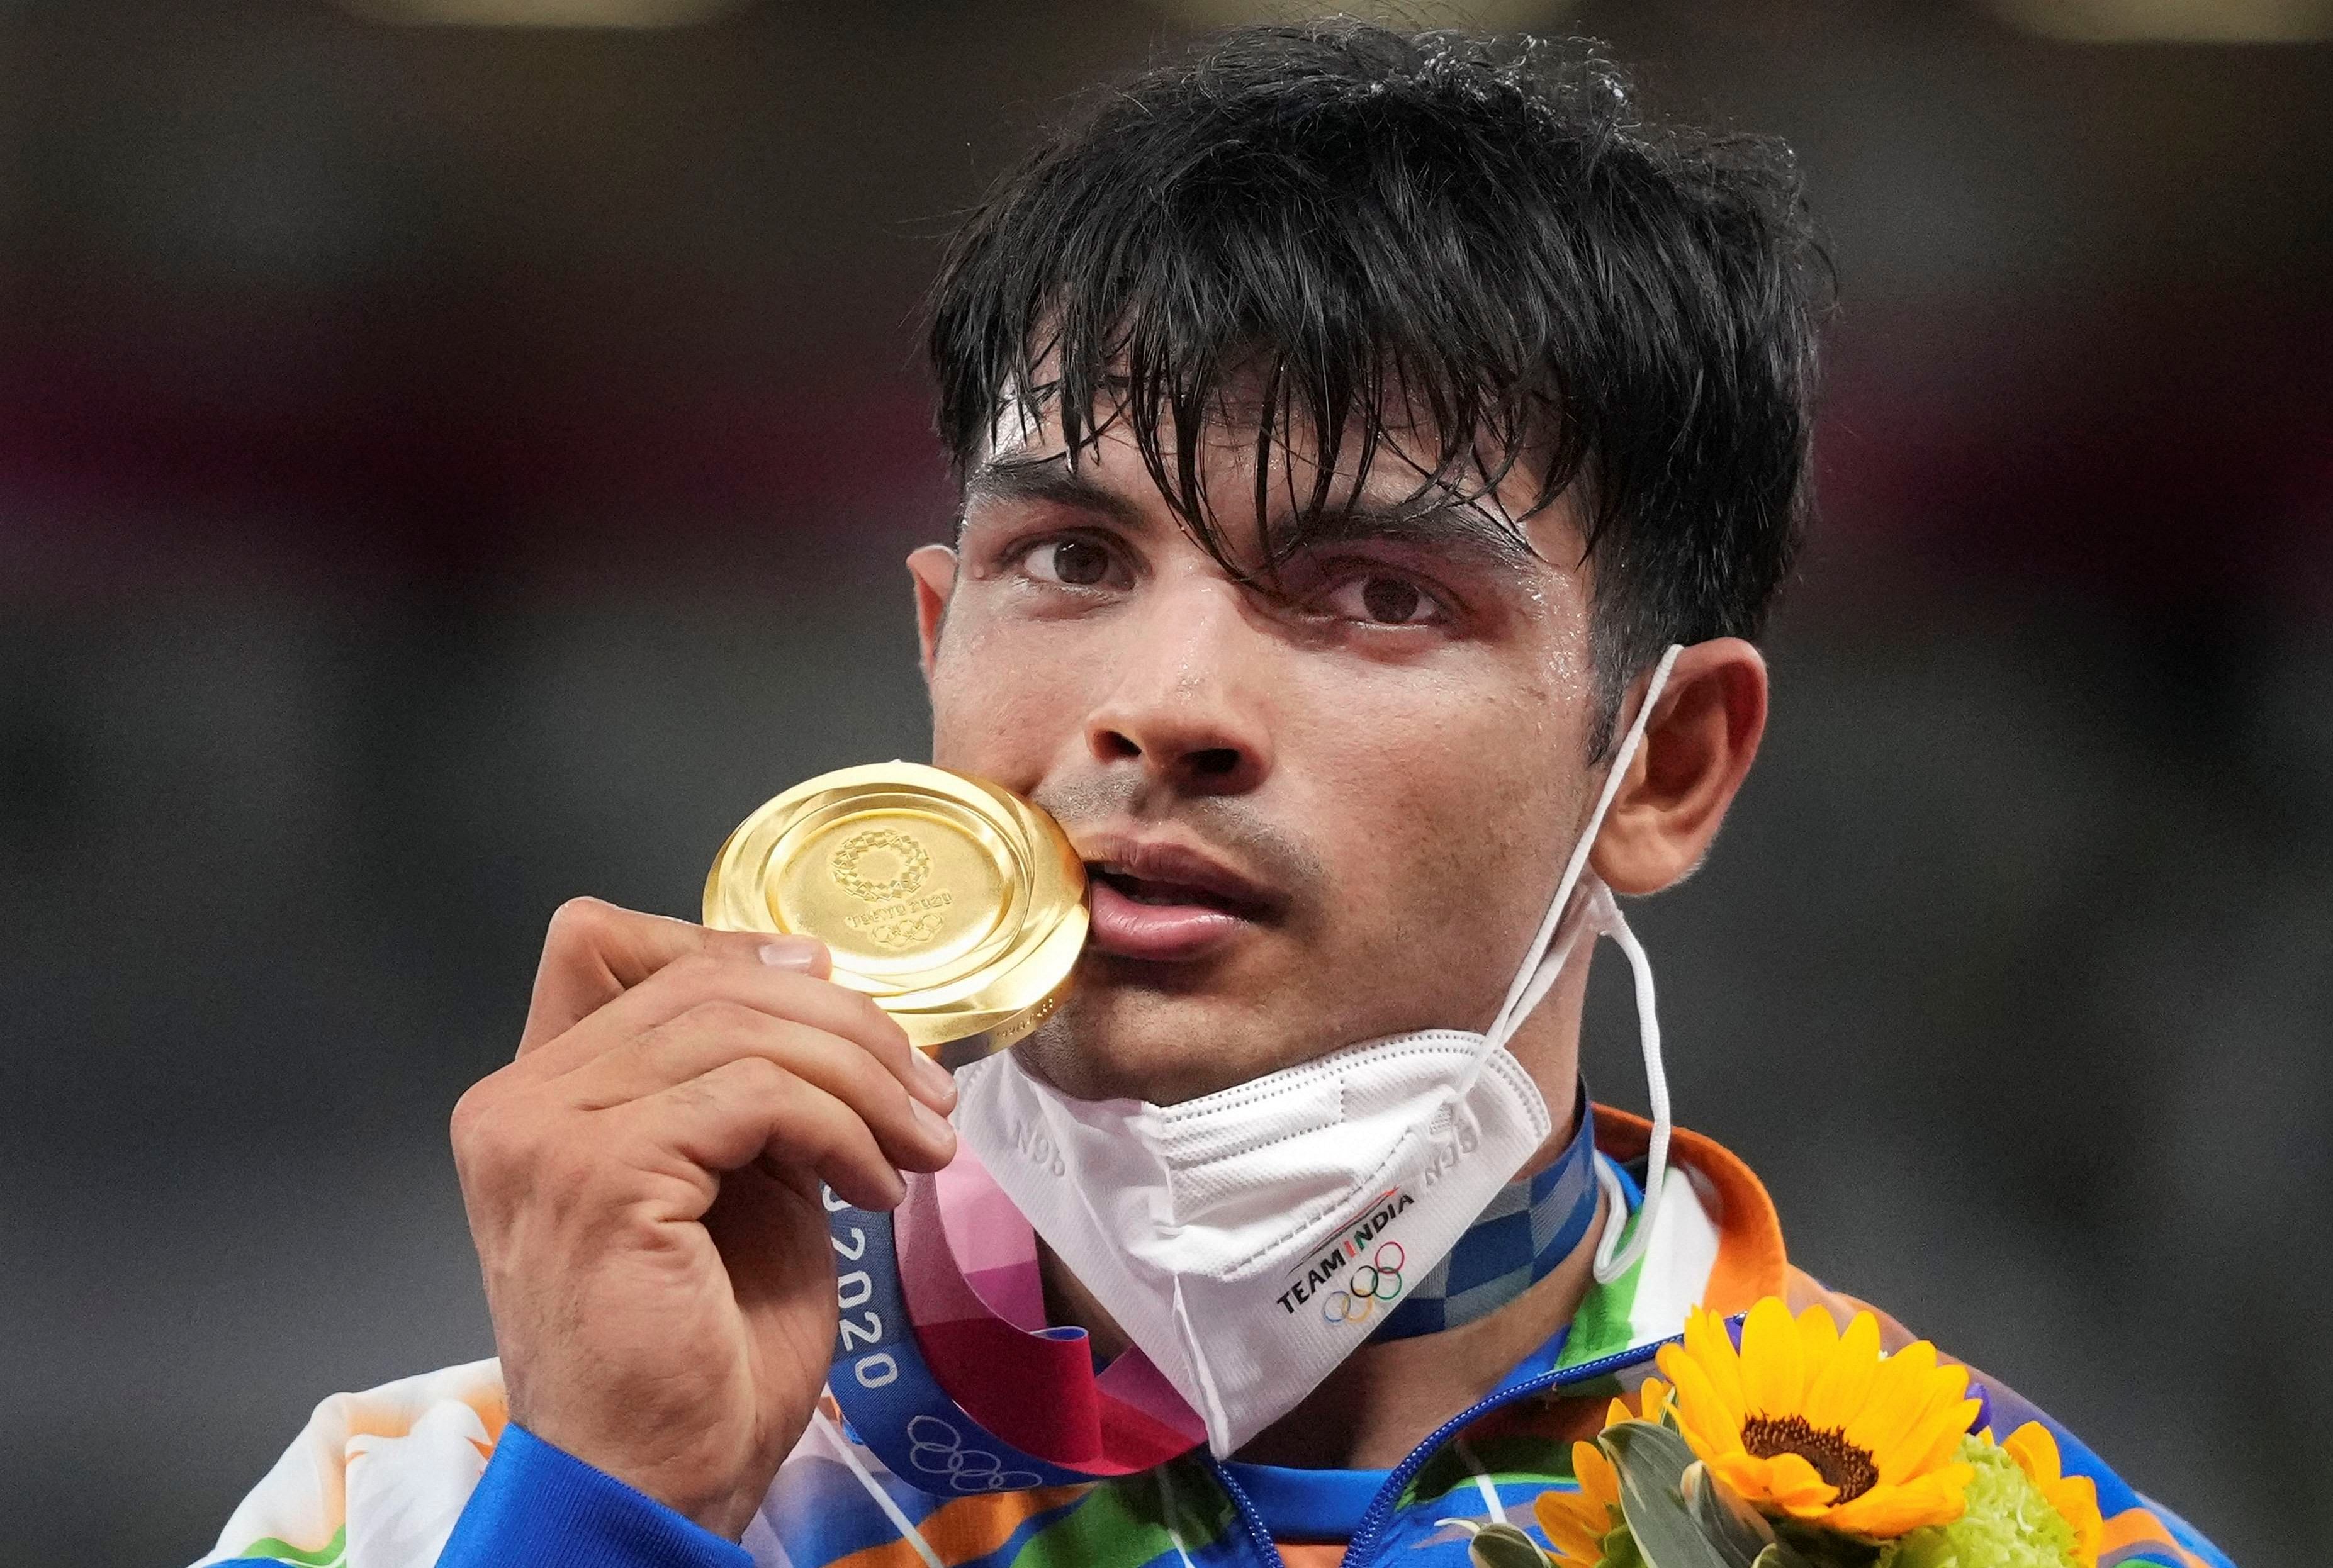 Feels unbelievable, didn't know it would be gold' — Neeraj Chopra says after Olympic win